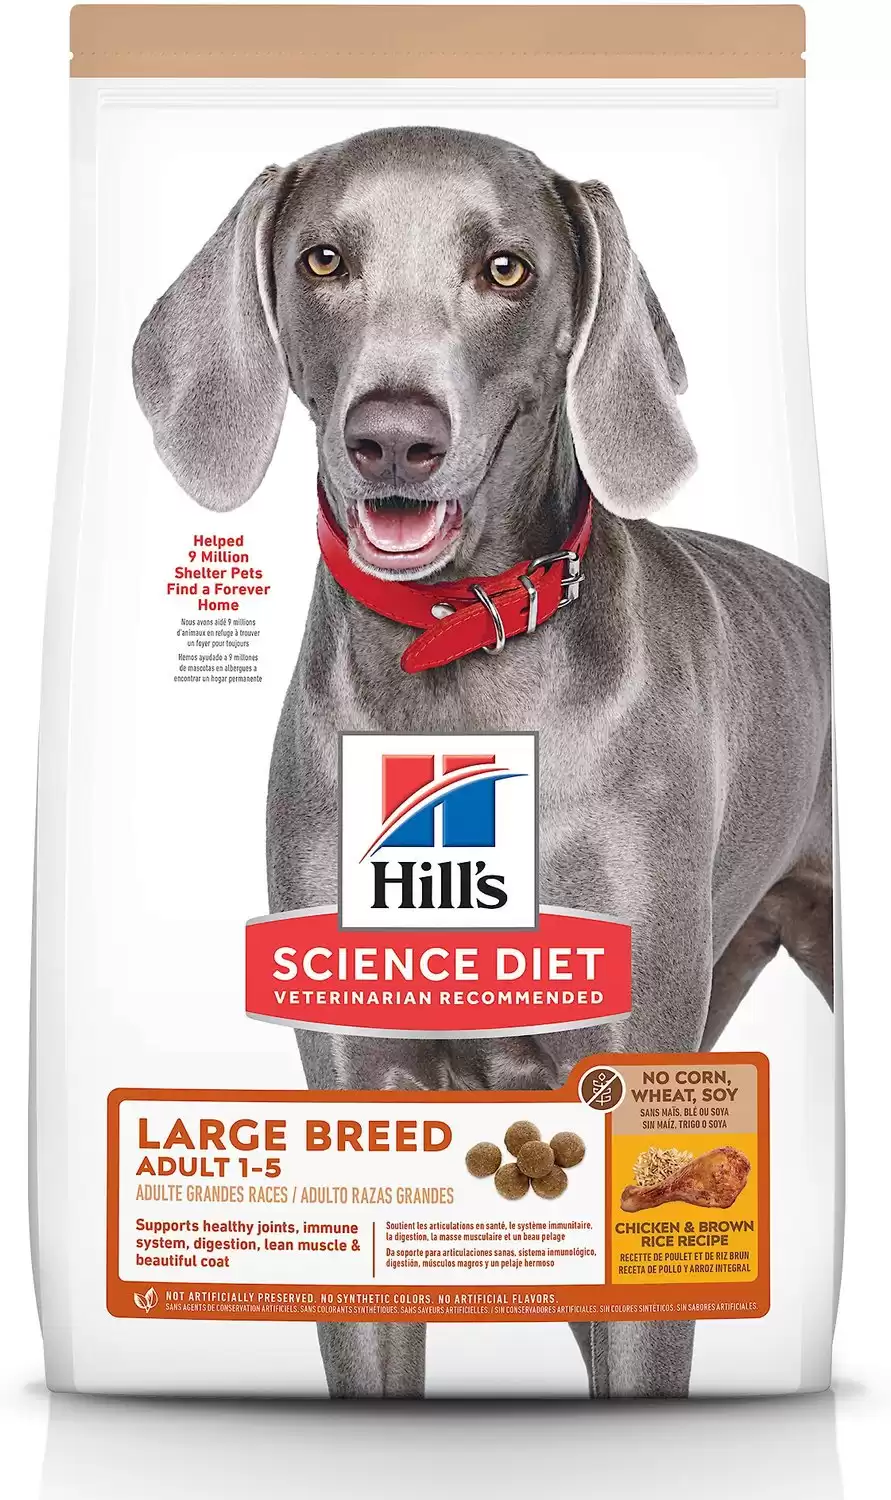 Hill's Science Diet Adult 1-5 Large Breed Chicken & Brown Rice Recipe